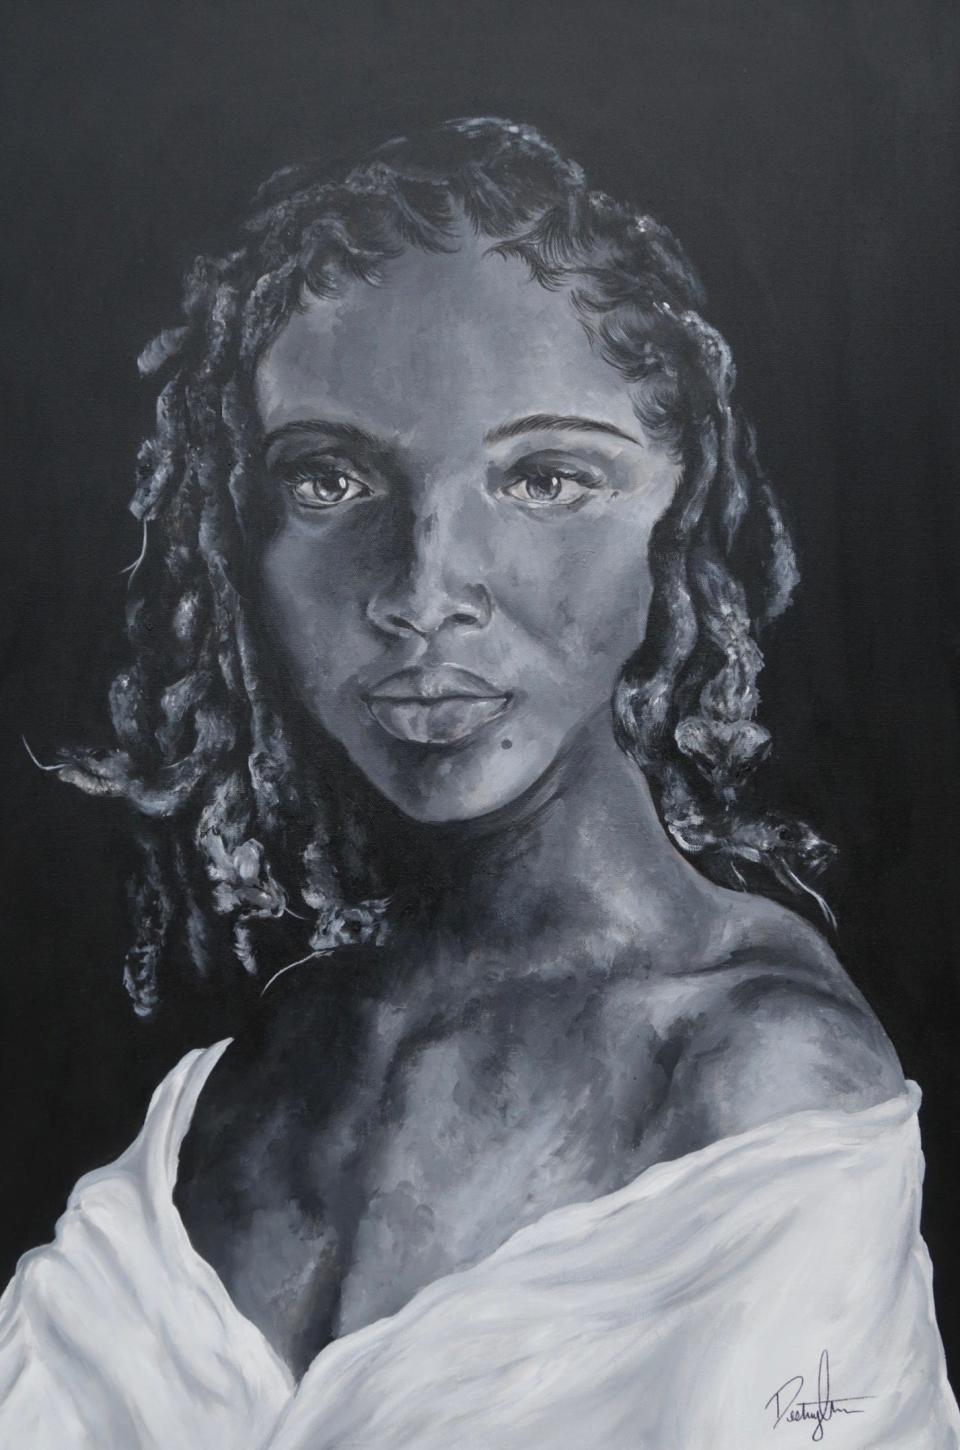 The 2023 Visions in Black exhibition will be presented on Feb. 2-25. Destiny Luv’s “Soft Stones” will be shown at the Manatee Performing Arts Center.